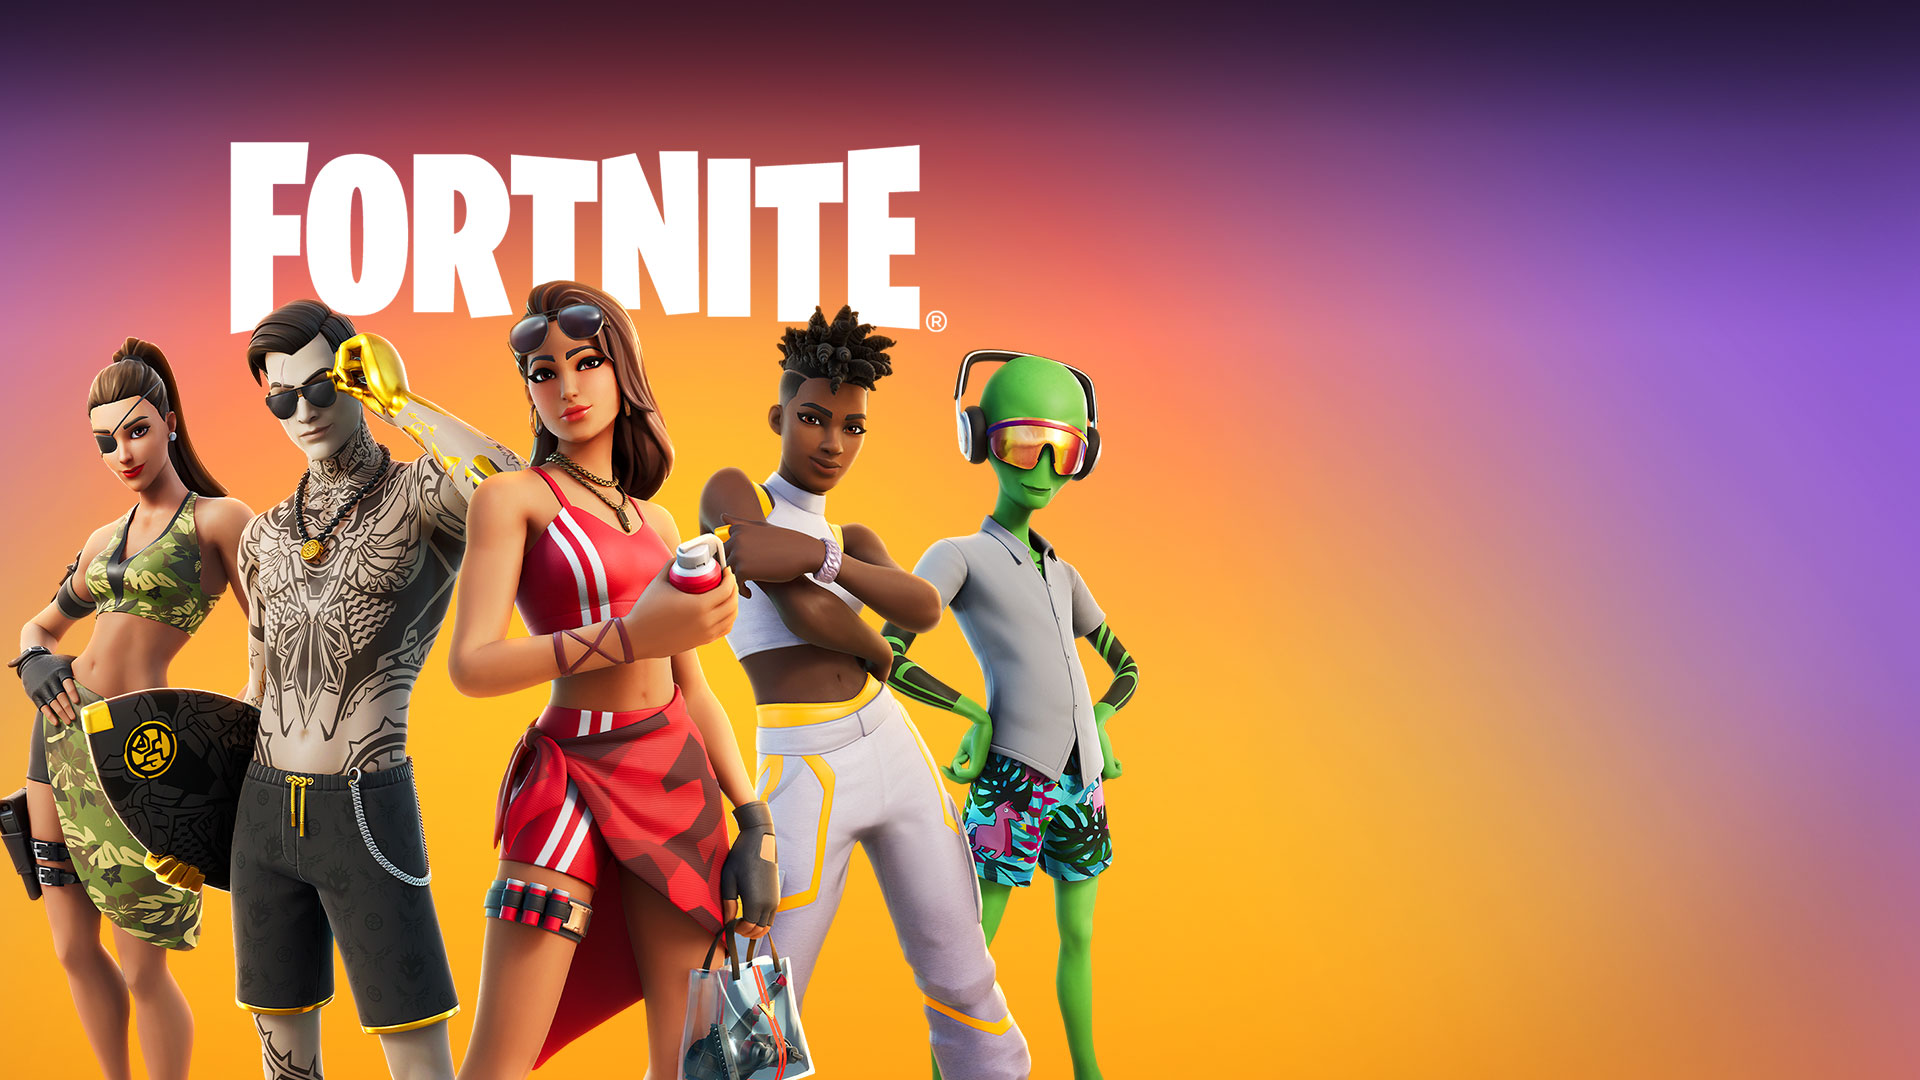 Five Fortnite characters dressed in urban style pose together